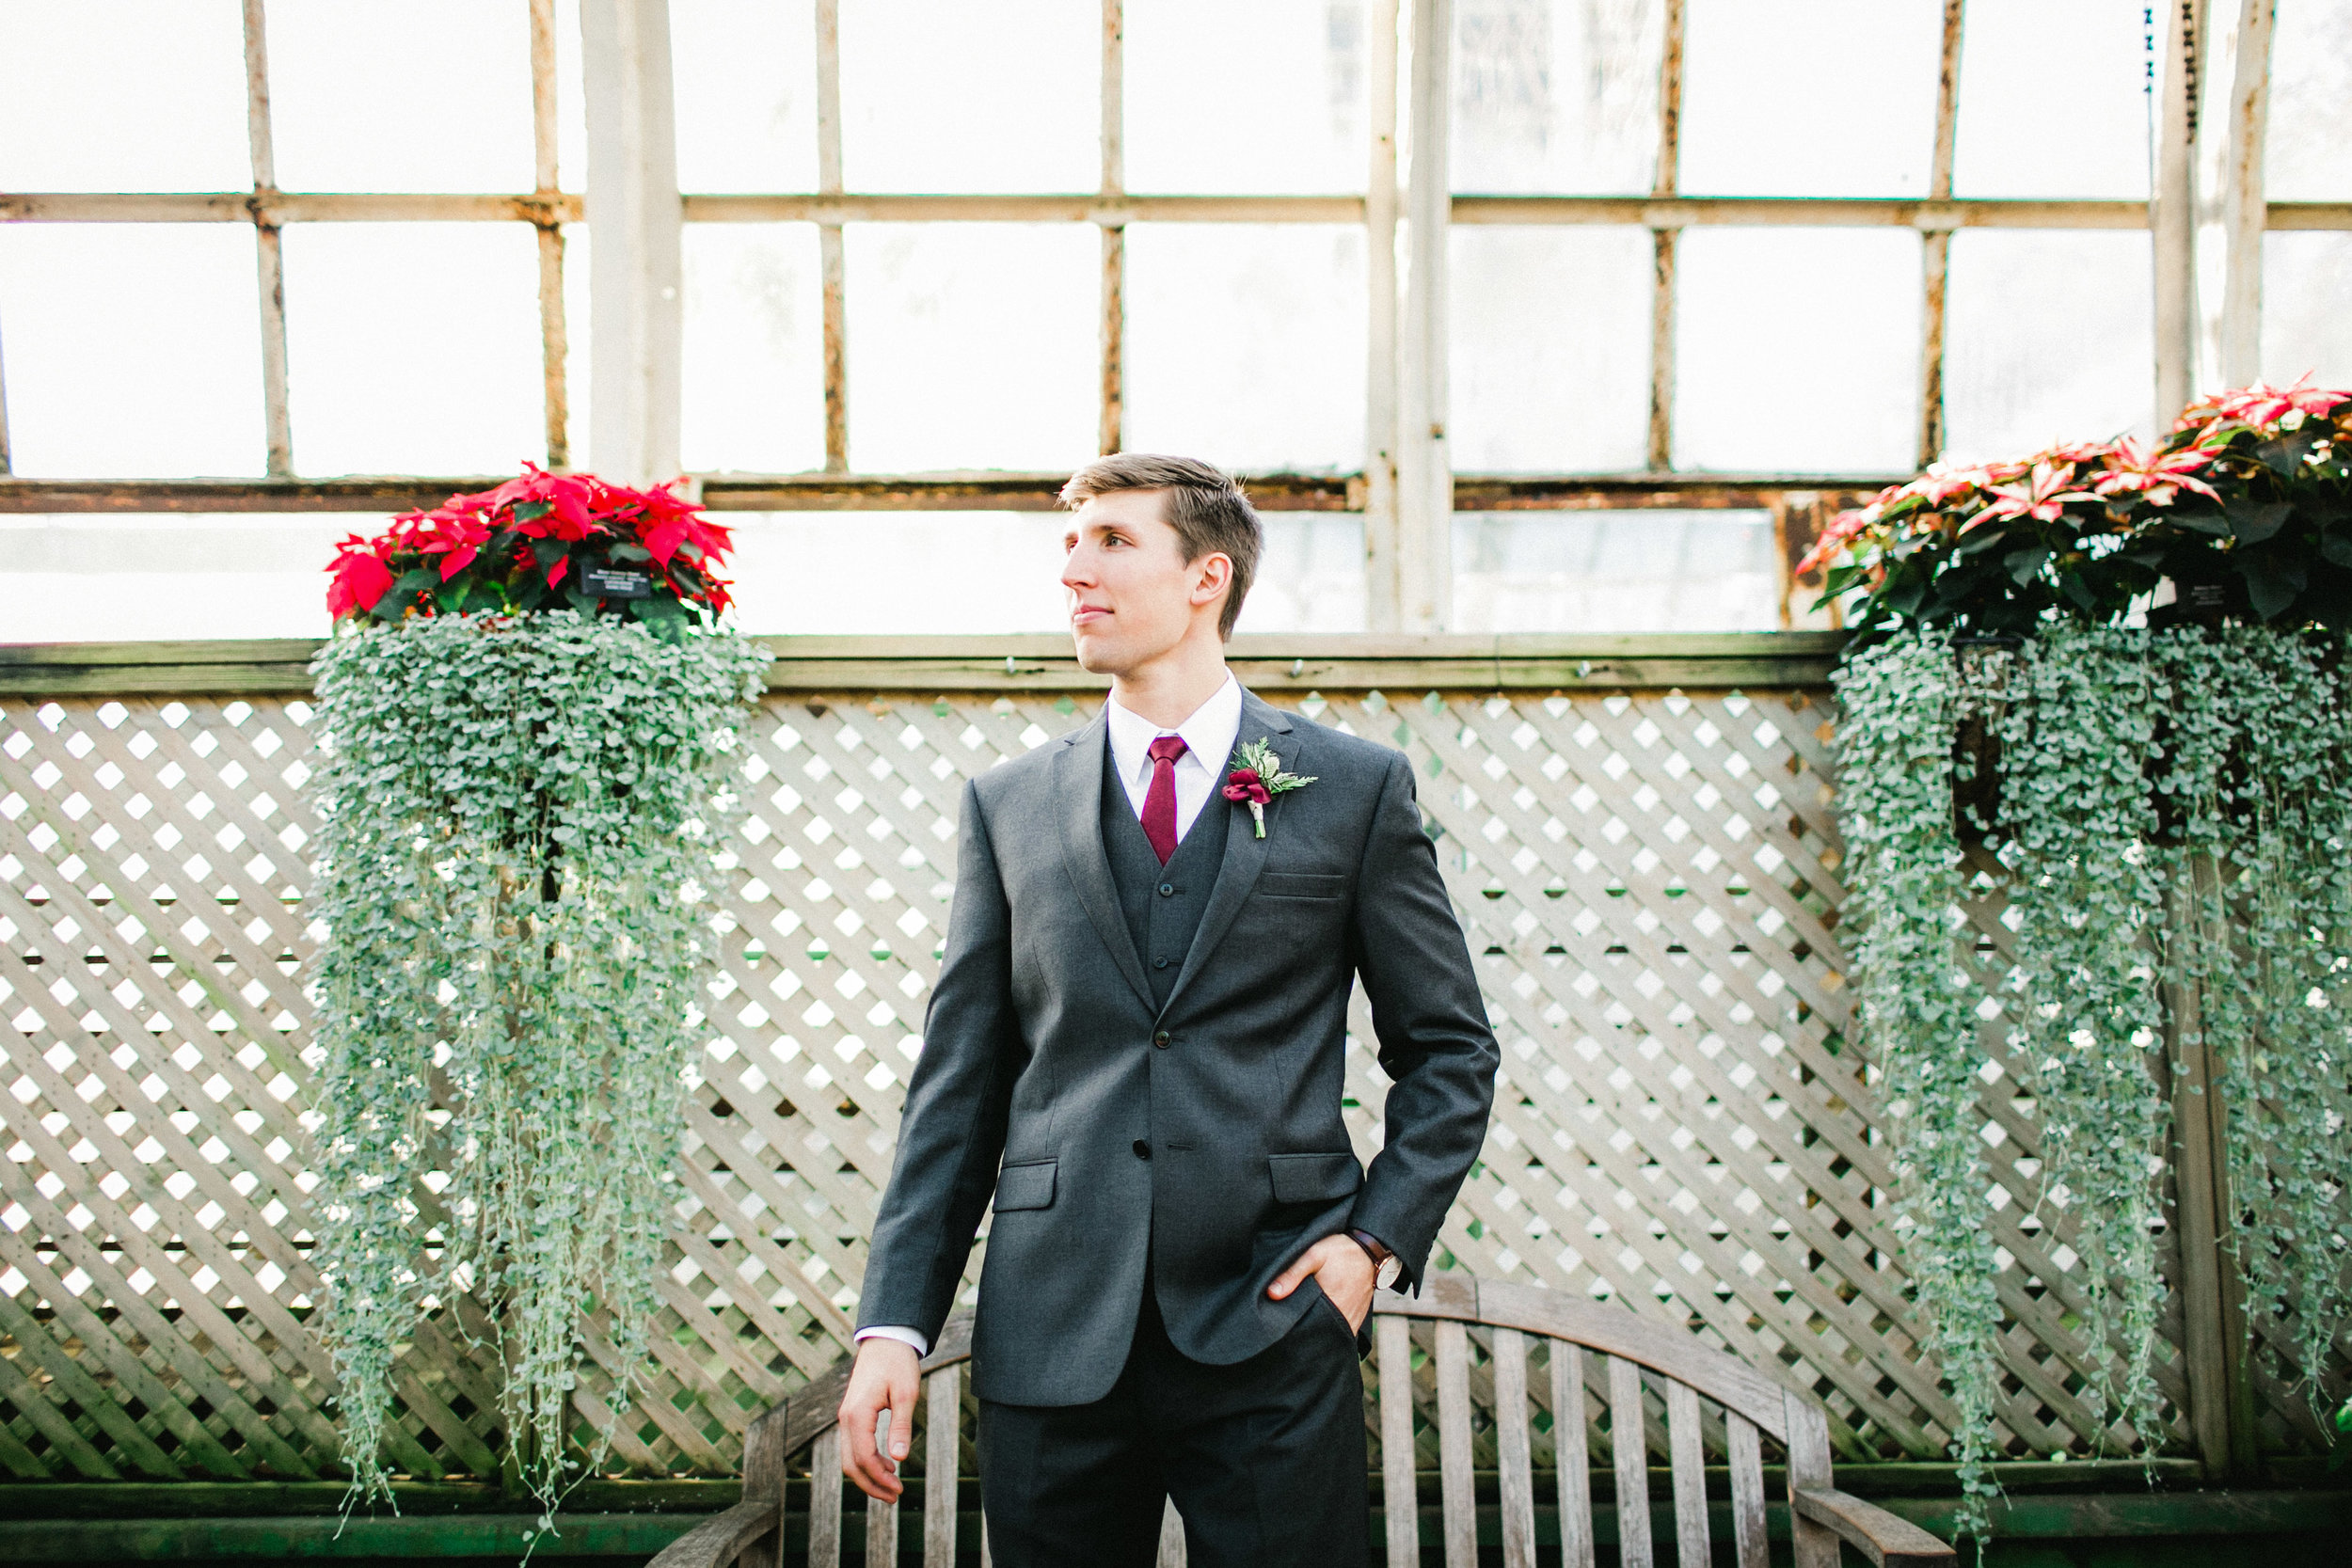 Groom Wedding Portraits in a Conservatory